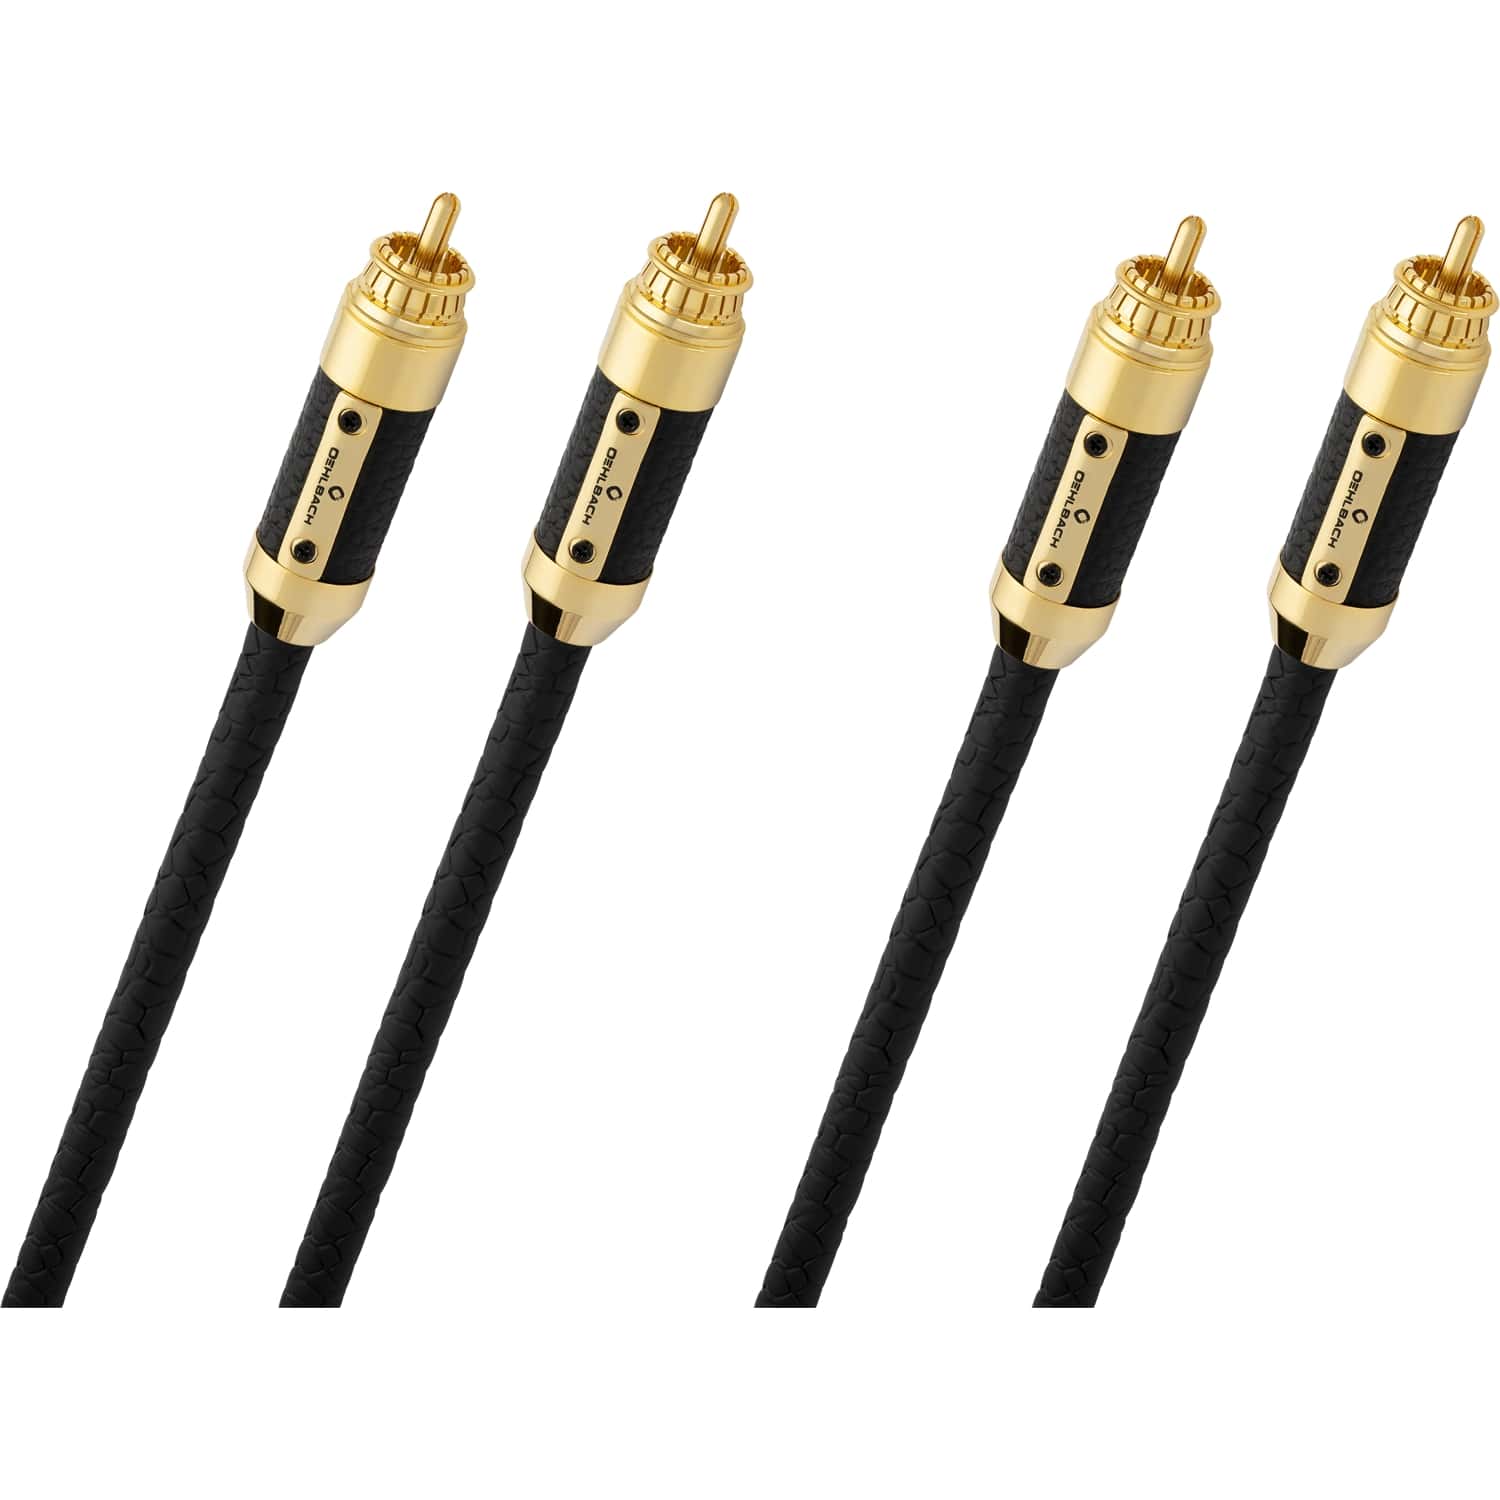 Кабели межблочные аудио Oehlbach STATE OF THE ART XXL Black Connection Cable RCA, 2x1,50m, gold кабели межблочные аудио oehlbach state of the art xxl cable rca 2x2 00m gold d1c13116